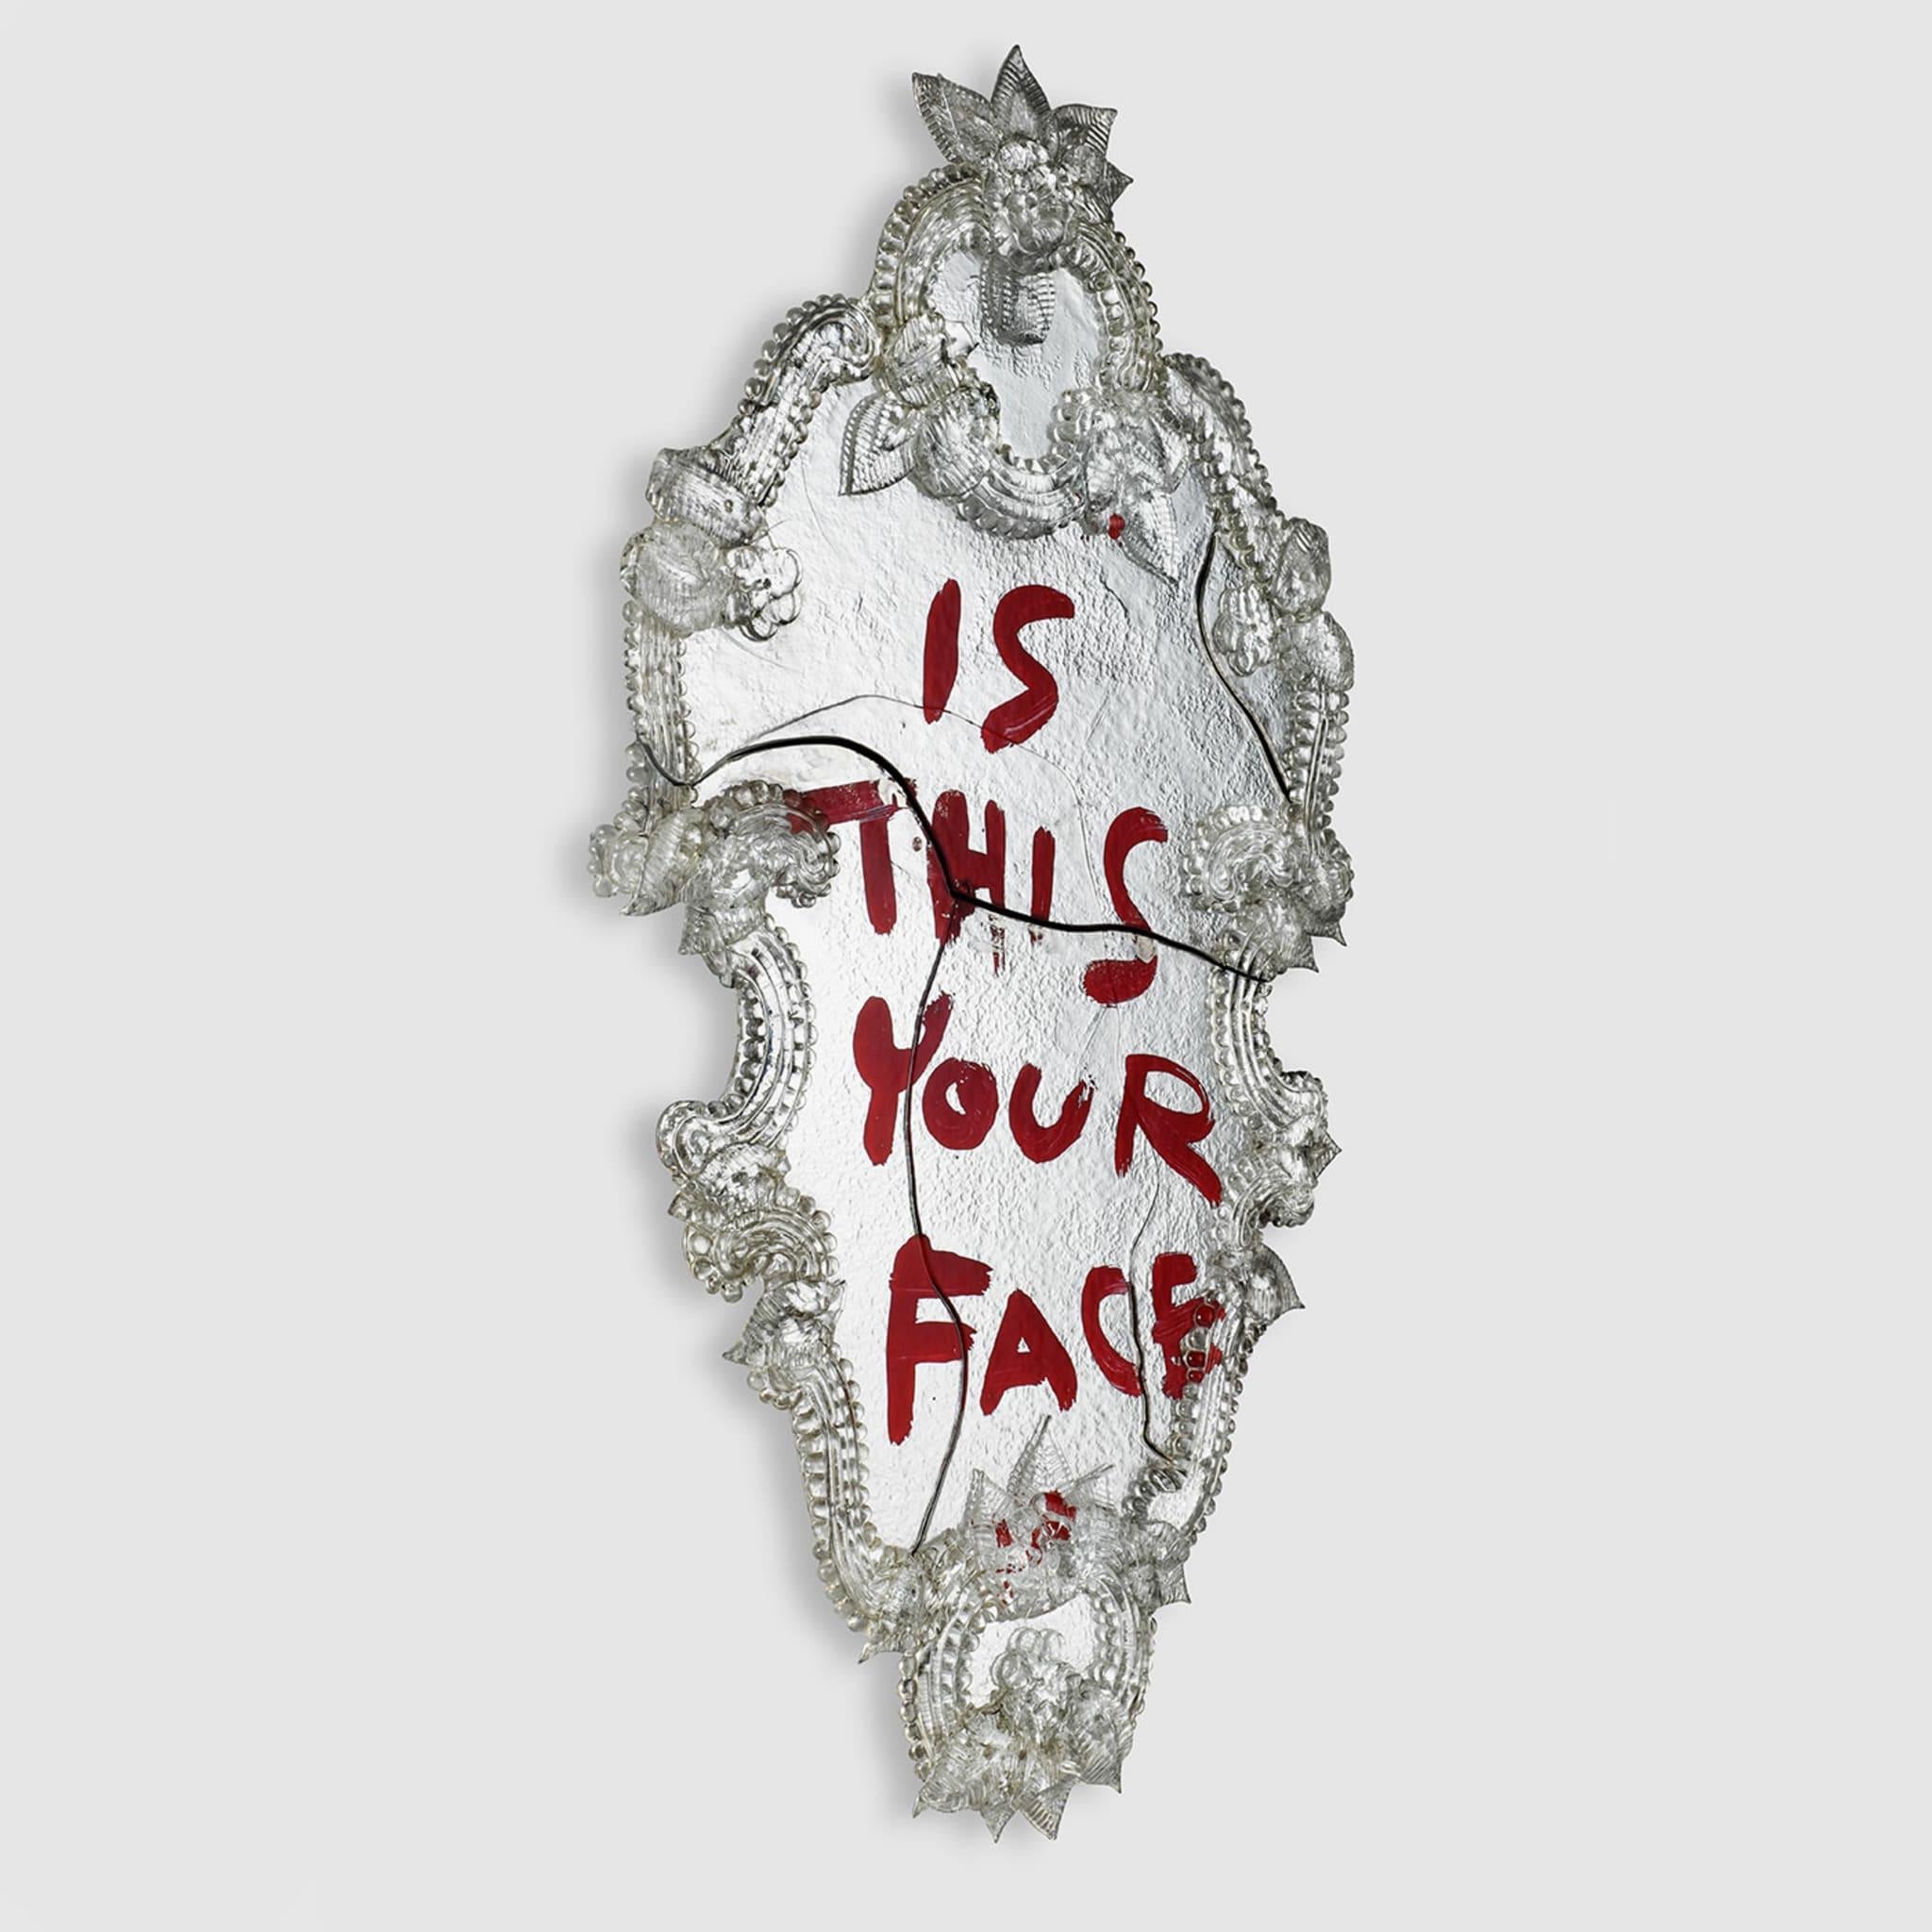 Your Face, a piece of the Melting Words collection deisgned by Leo De Carlo., is the contemporary interpretation of a Venetian mirror: melted, deformed, cracked and vandalised like its namesake. Your Face is a metaphor for the state of the city of